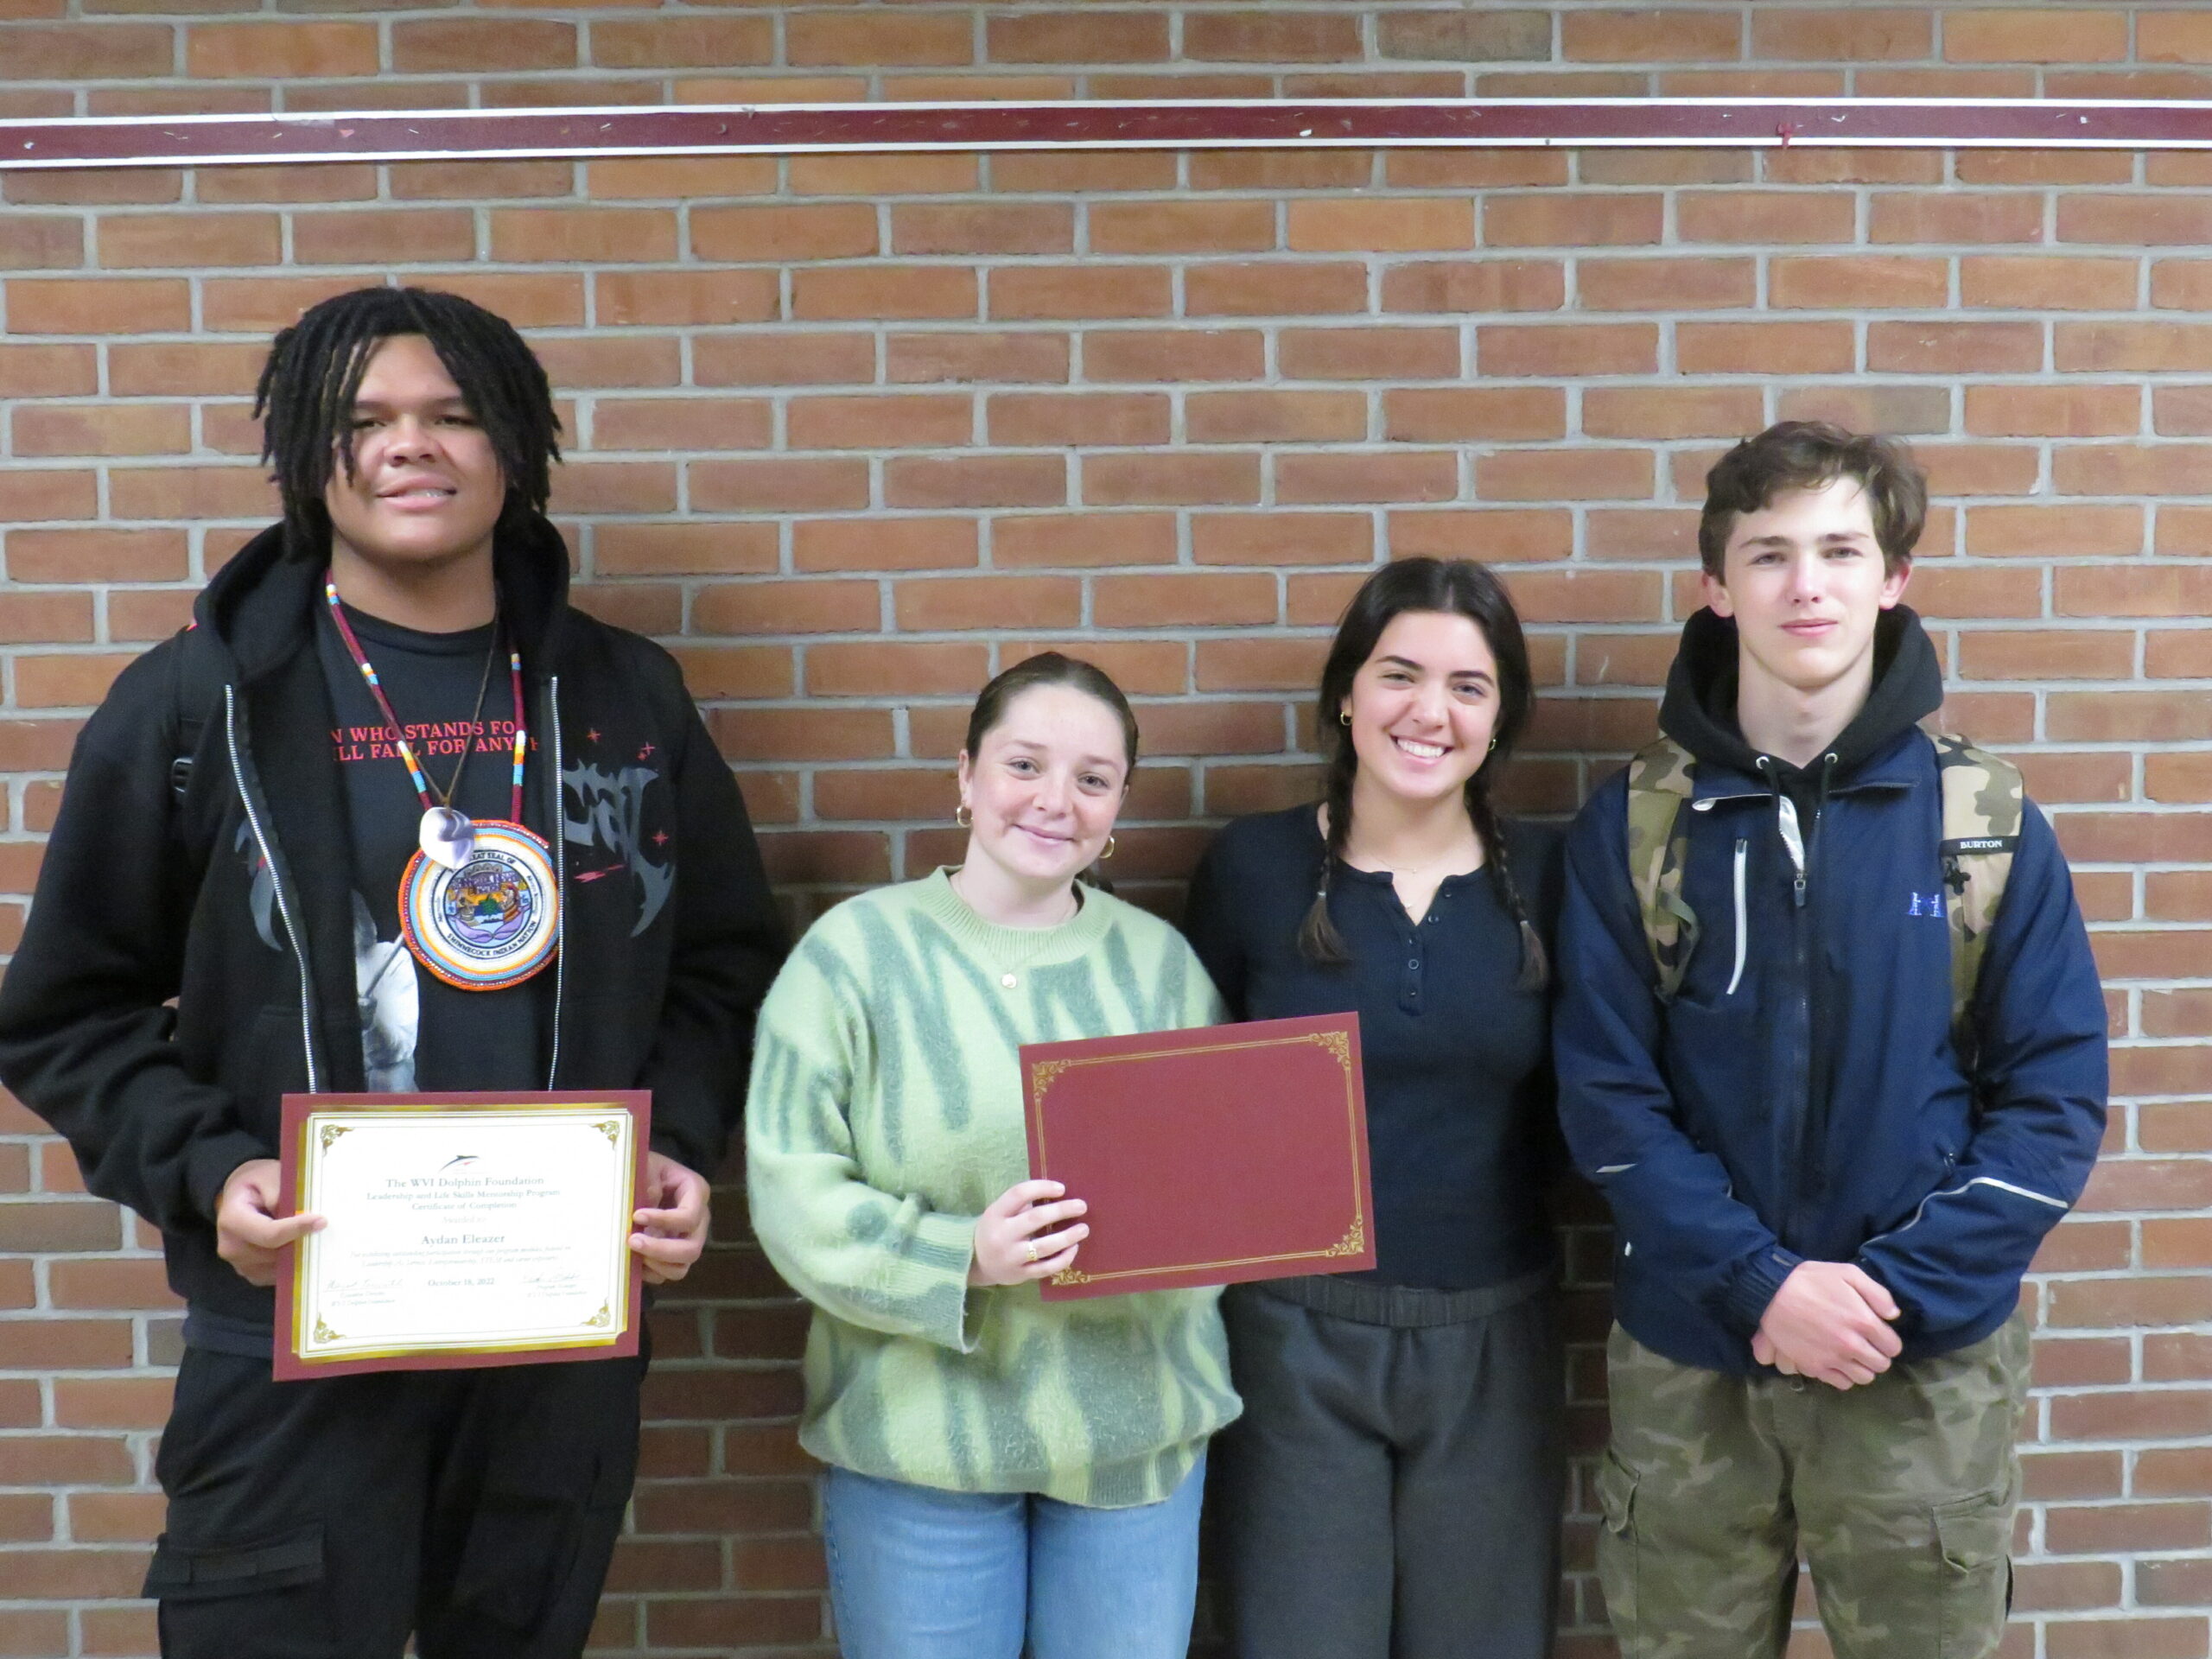 Southampton High School students, from left, Aydan Eleazer, Paige Garvin, Celia Ginsberg and Andrew Souhrada earned certificates of completion from the Leadership and Life Skills Mentorship Program. Yassine Boukaissi, not pictured, also earned a certificate. COURTESY SOUTHAMPTON SCHOOL DISTRICT